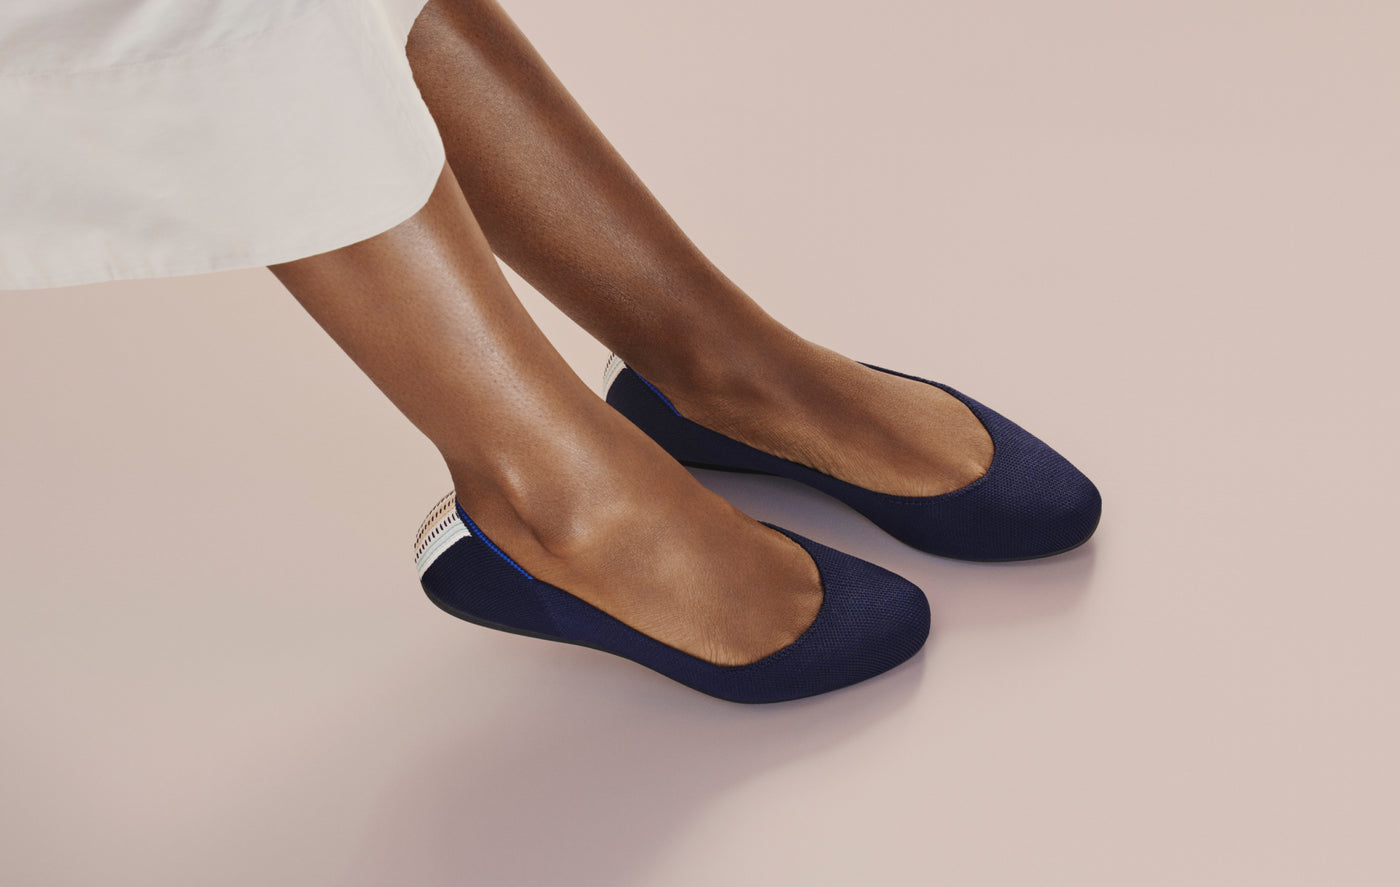 Comfortable flats and why every woman needs a pair.